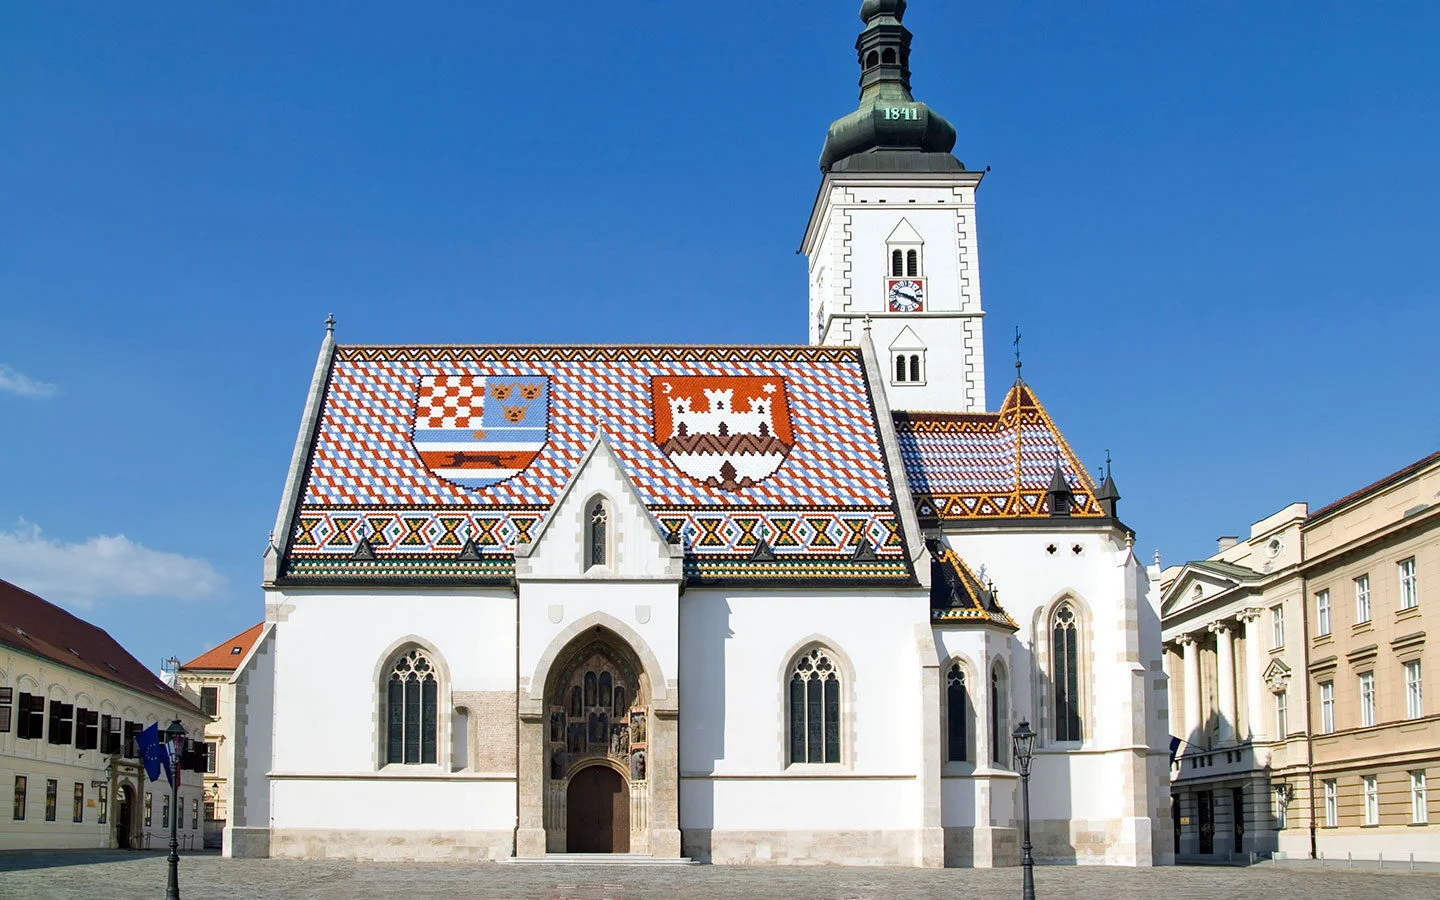 St Mark's Church with its colourful tiled roof in Zagreb, Croatia